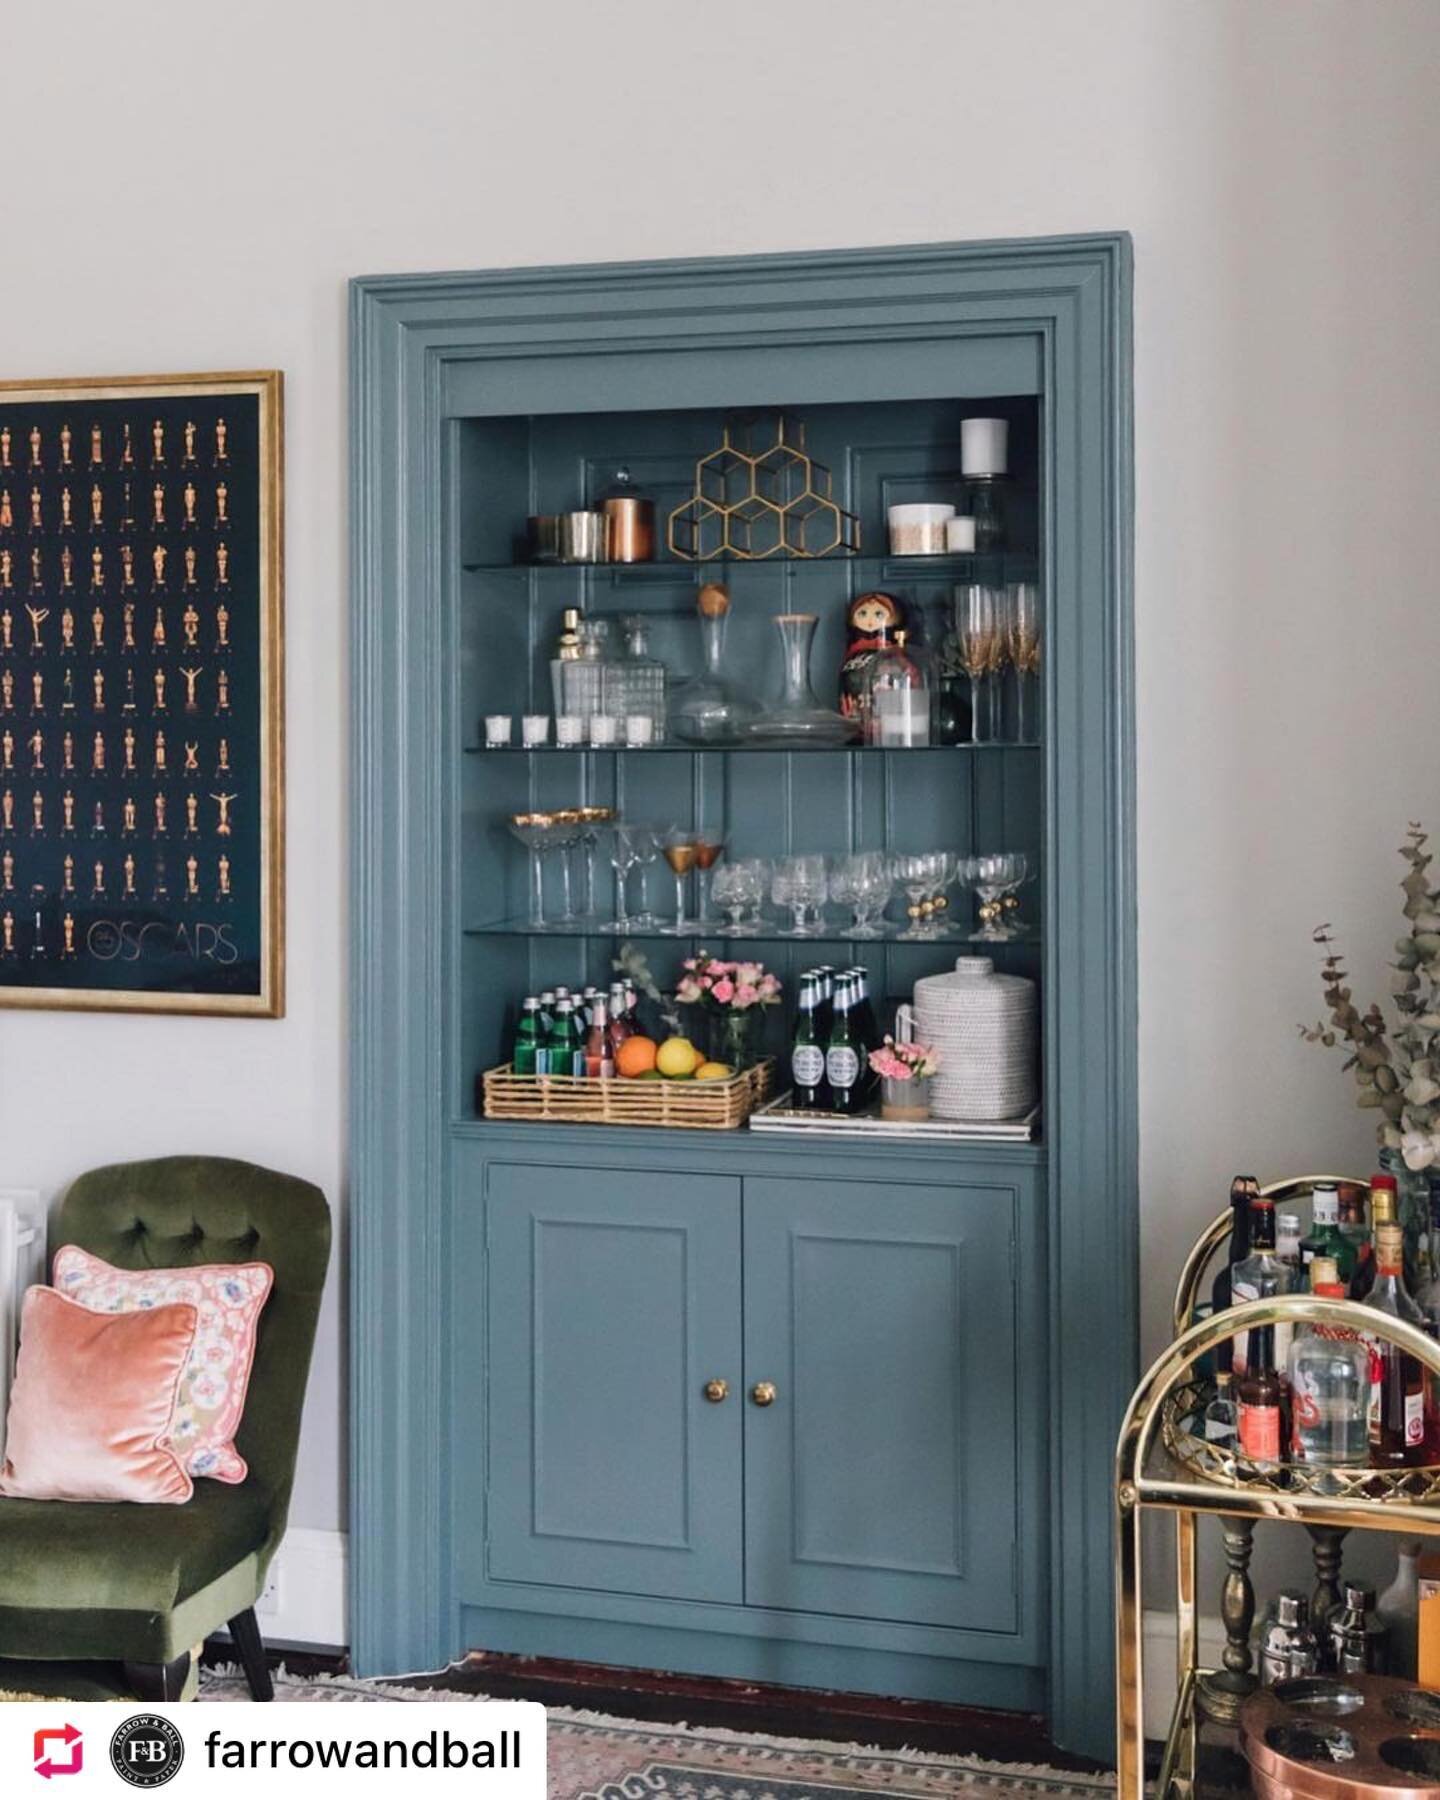 #farrowandballfriday and a cheers to the weekend! This clever built-in bookcase bar, painted in #DeNimes, perfectly tucks away into a #PavilionGray living room. 
.
Such a cool, sophisticated color combination! What do you think? Tell us in the commen